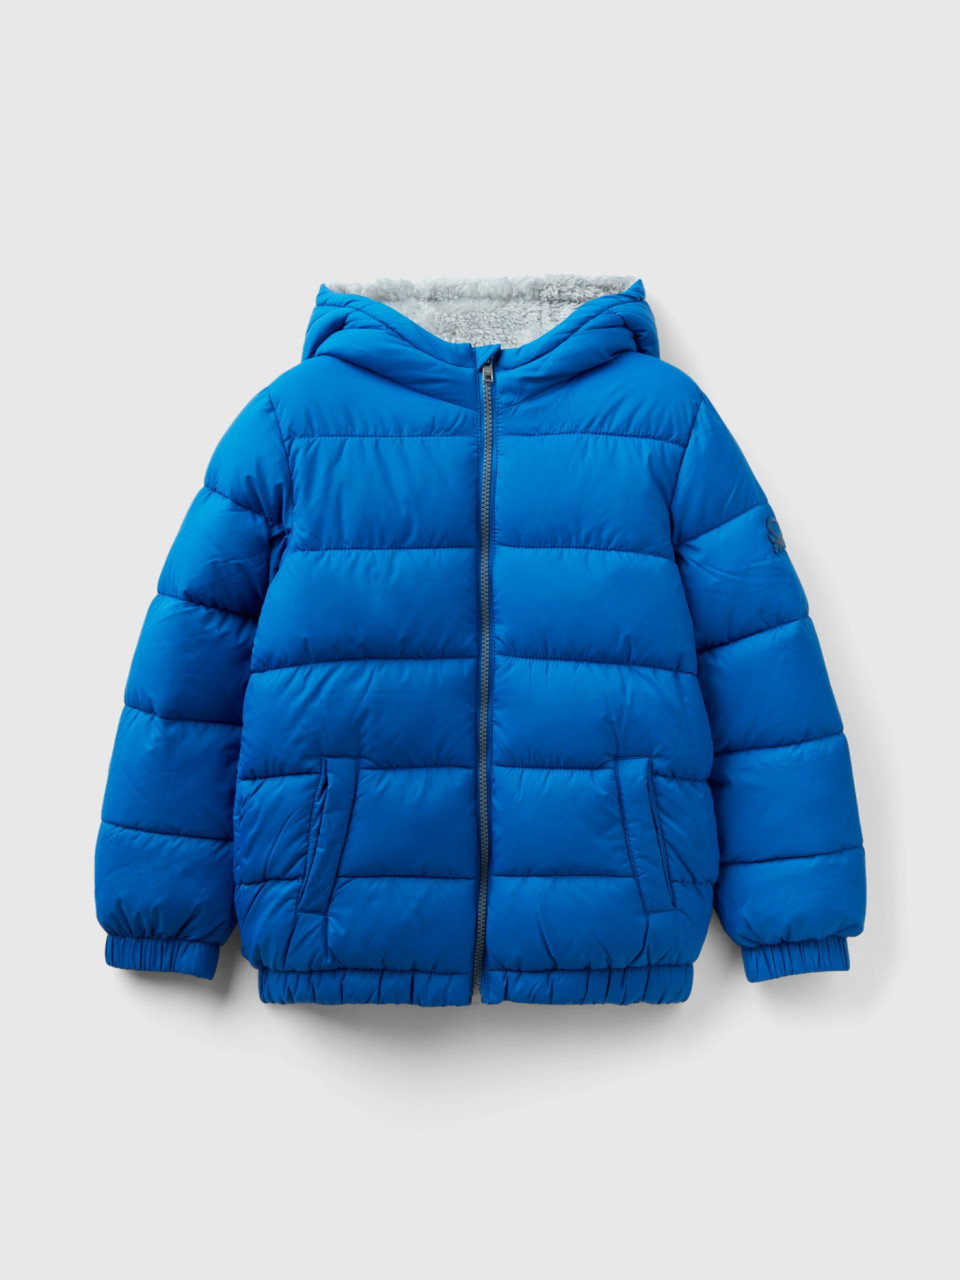 Benetton, Padded Jacket With Teddy Interior, Bright Blue, Kids